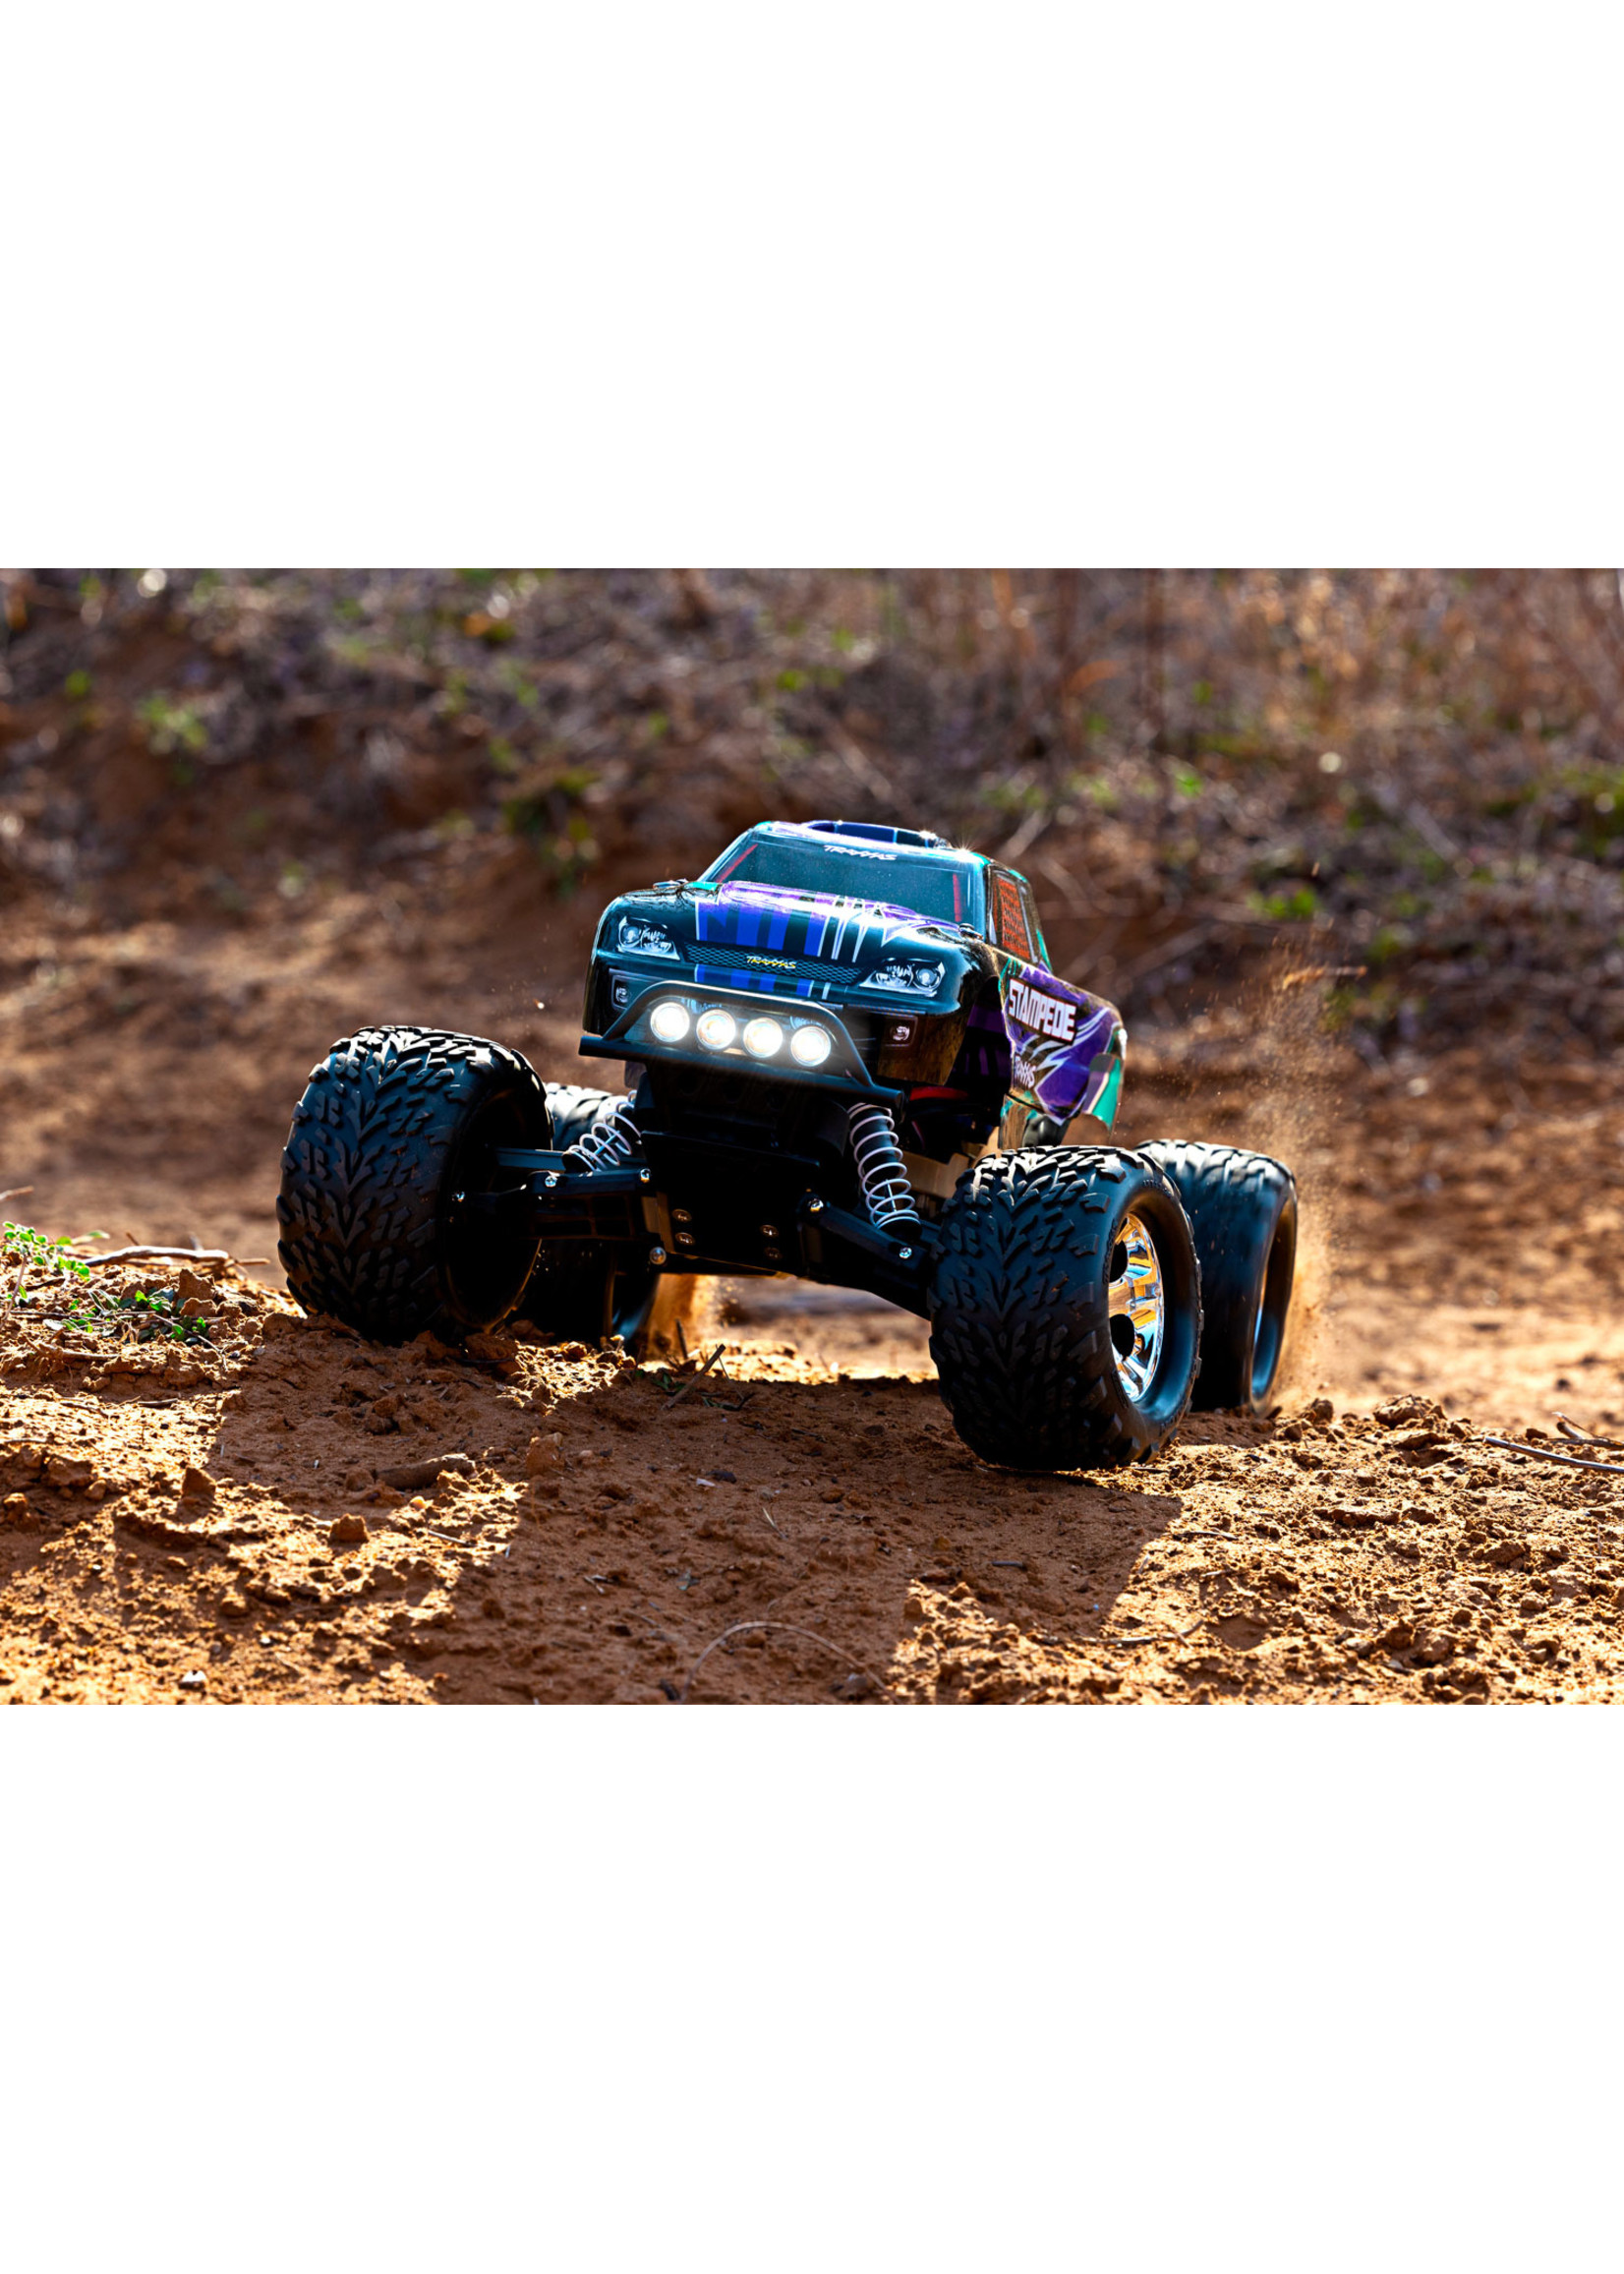 Traxxas TRA36054-61 Traxxas Stampede: 1/10 Monster Truck w/LED Lights